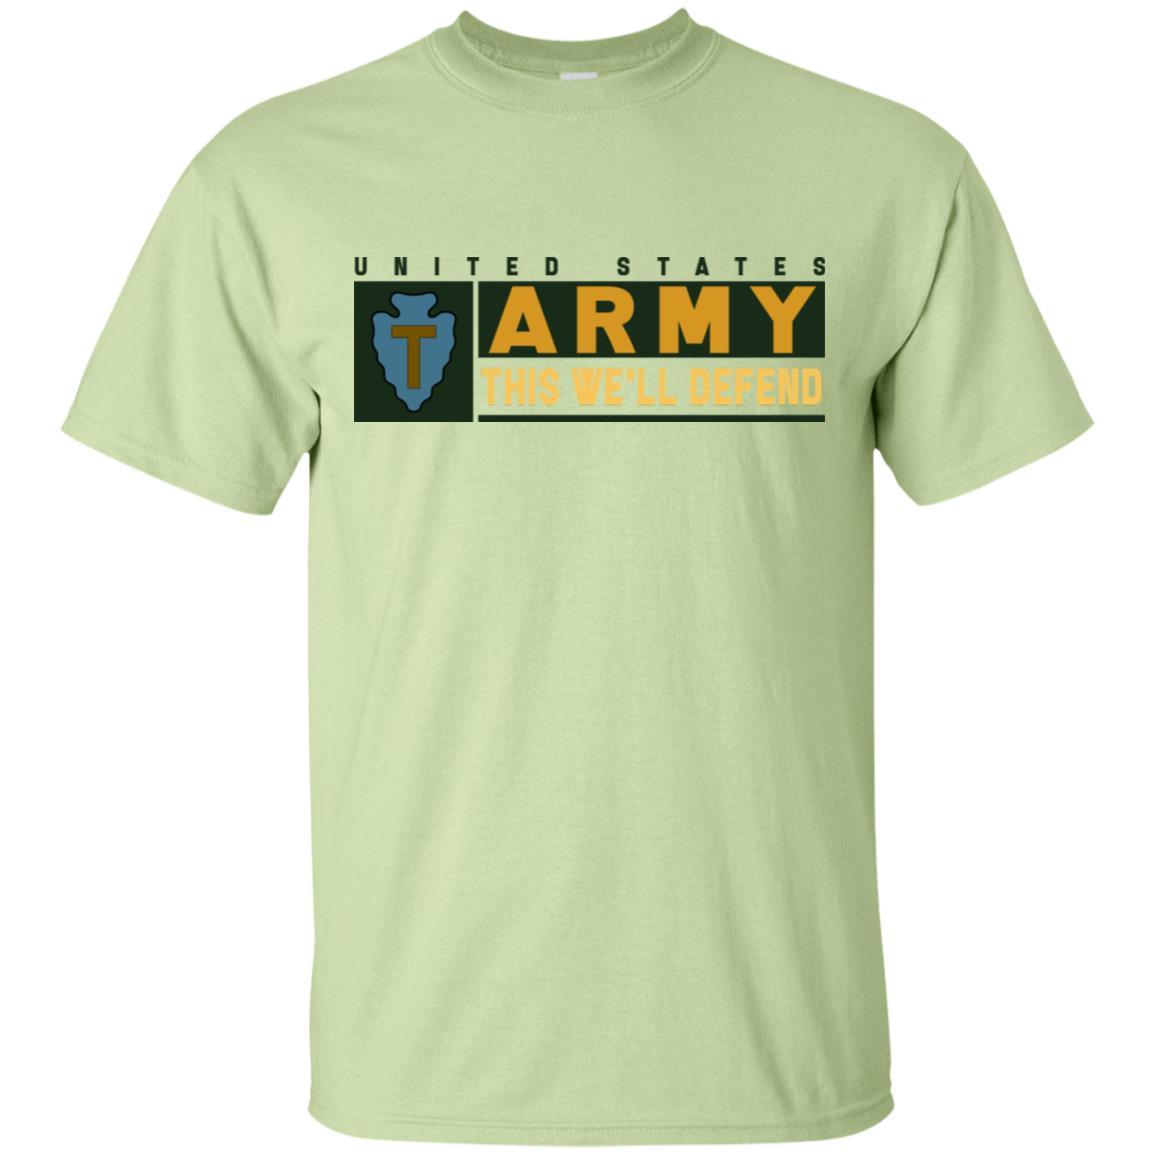 US Army 36TH INFANTRY DIVISION- This We'll Defend T-Shirt On Front For Men-TShirt-Army-Veterans Nation